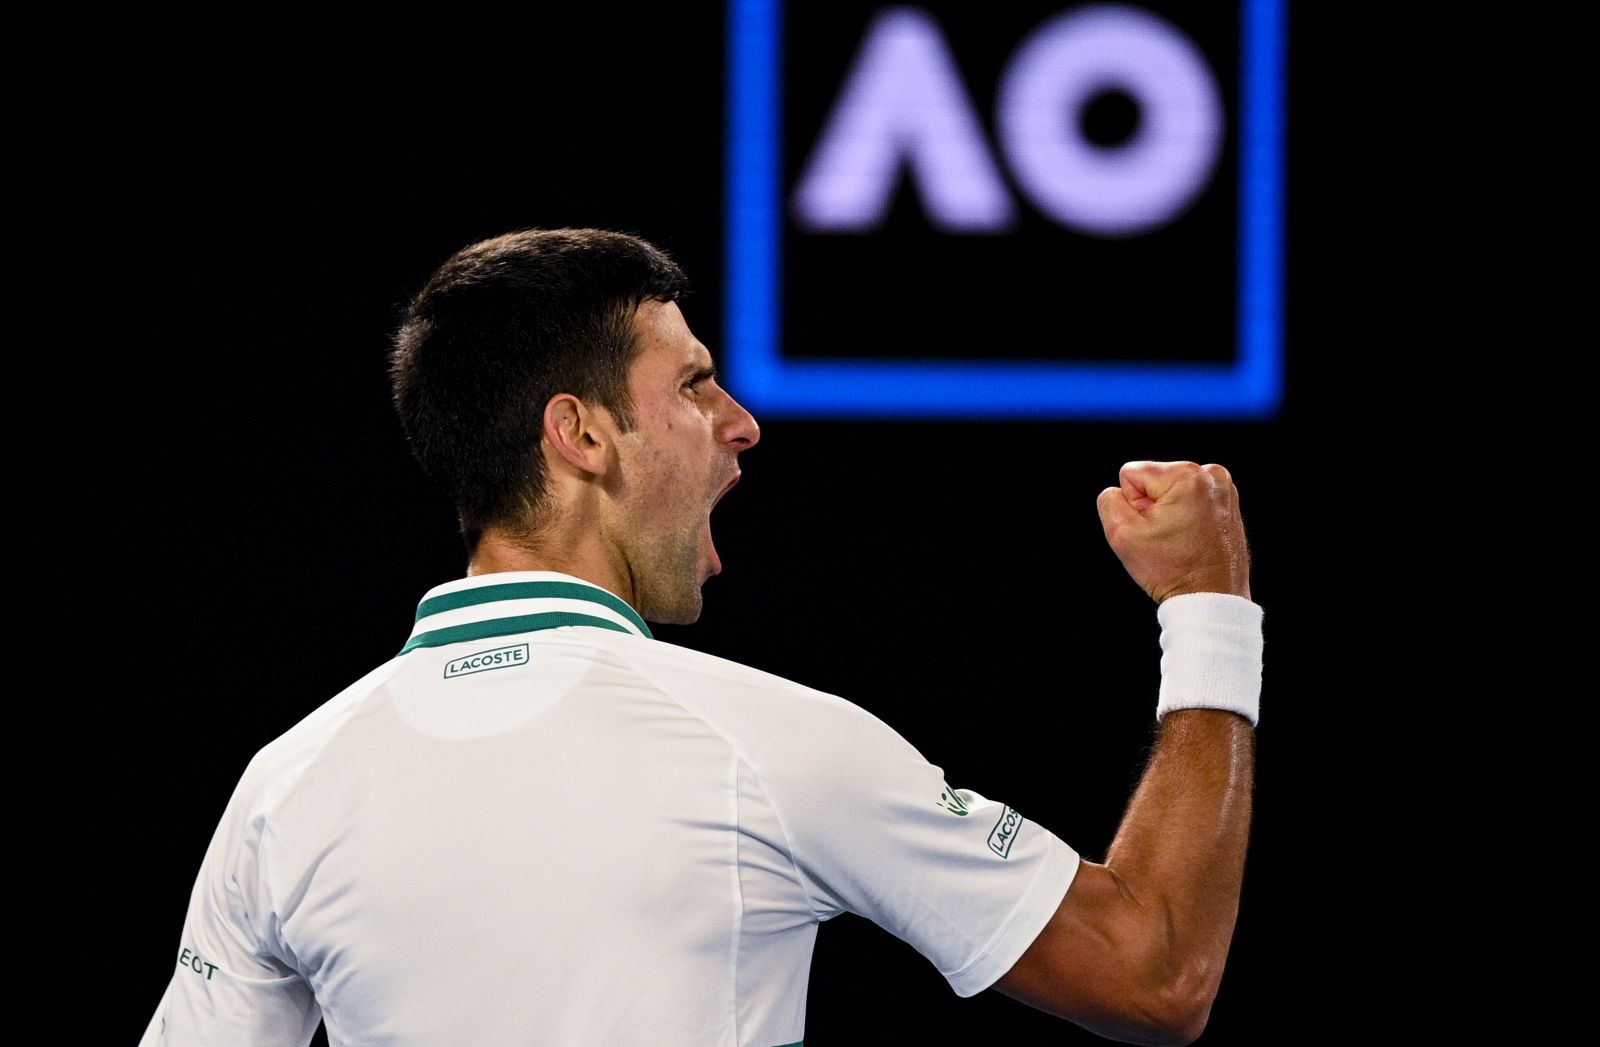 epa09027371 Novak Djokovic of Serbia reacts during his Men's singles finals match against Daniil Medvedev of Russia on Day 14 of the Australian Open Grand Slam tennis tournament at Melbourne Park in Melbourne, Australia, 21 February 2021.  EPA/DEAN LEWINS AUSTRALIA AND NEW ZEALAND OUT